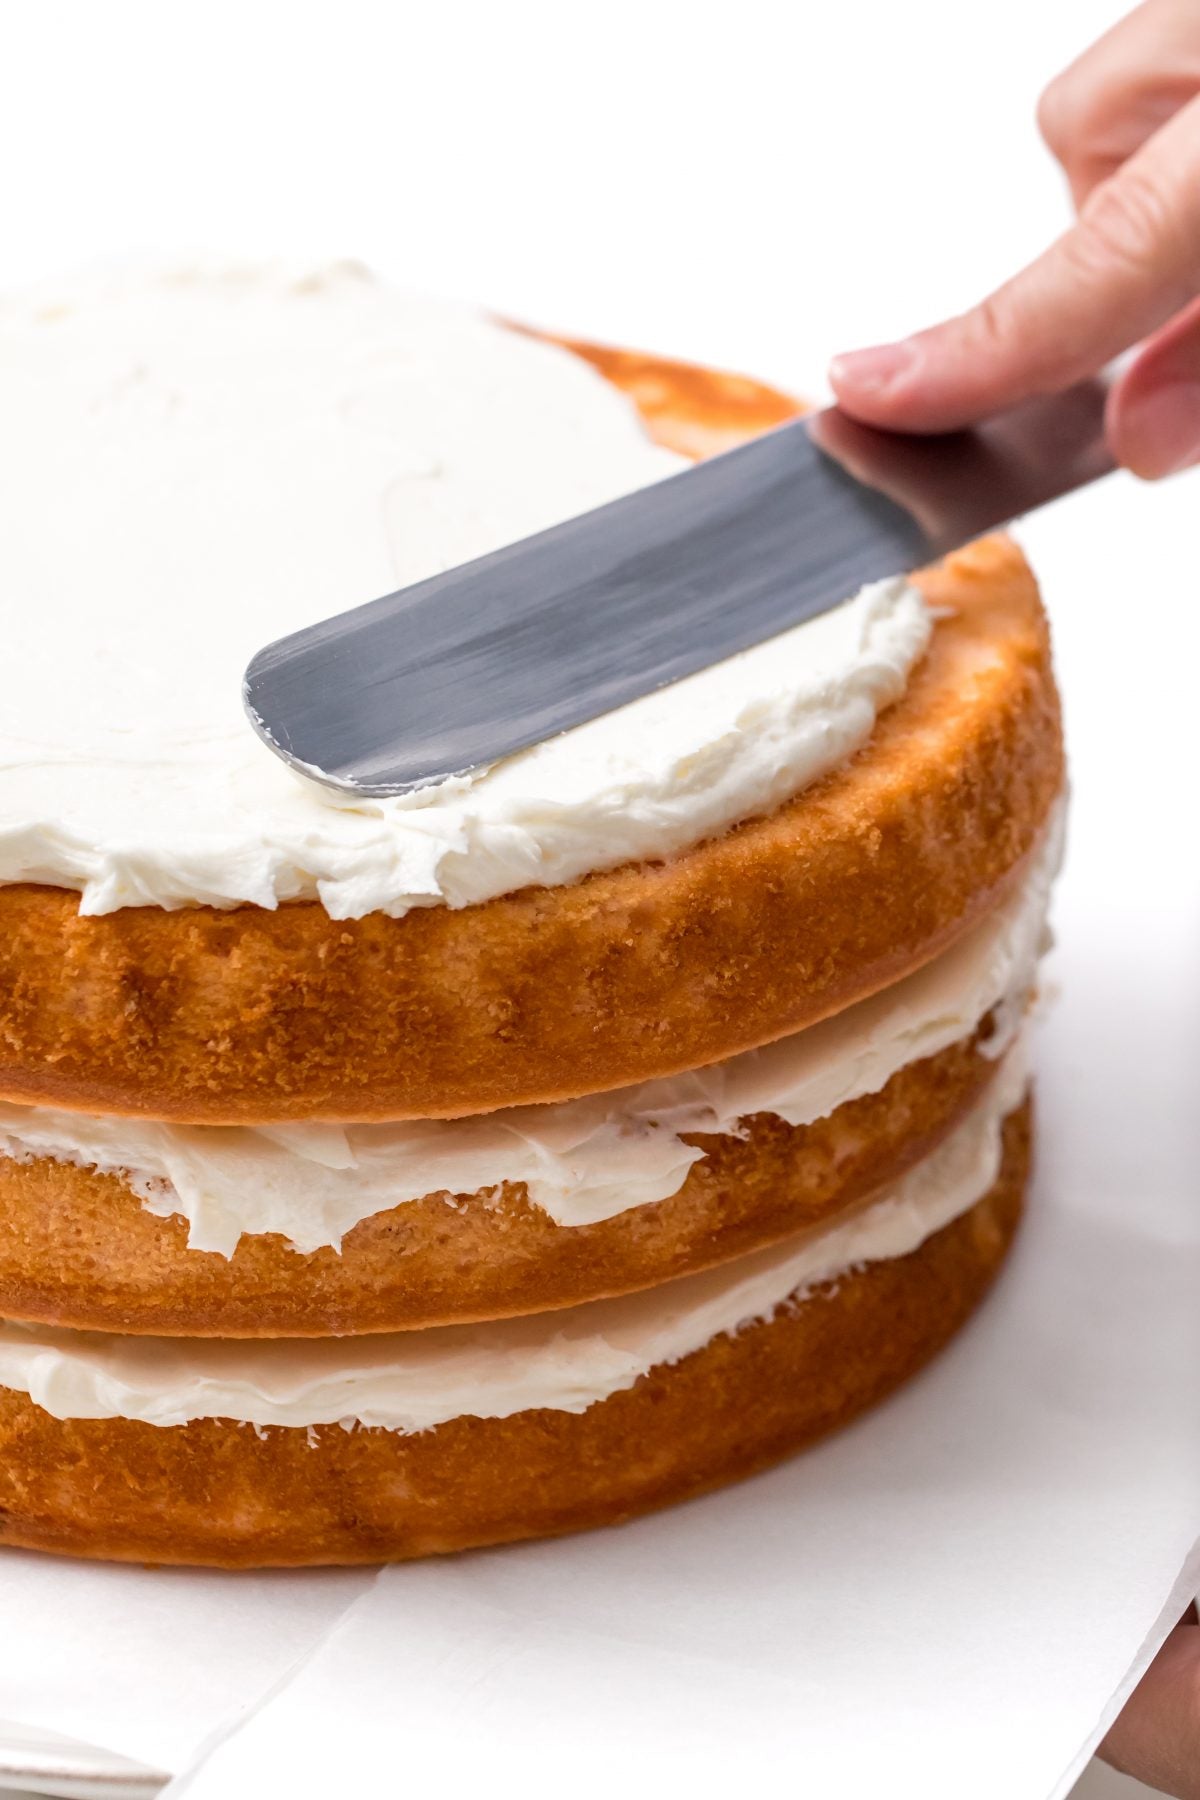 DISTRIBUTE THE ICING EVEN OVER THE LAST LAYER OF CAKE